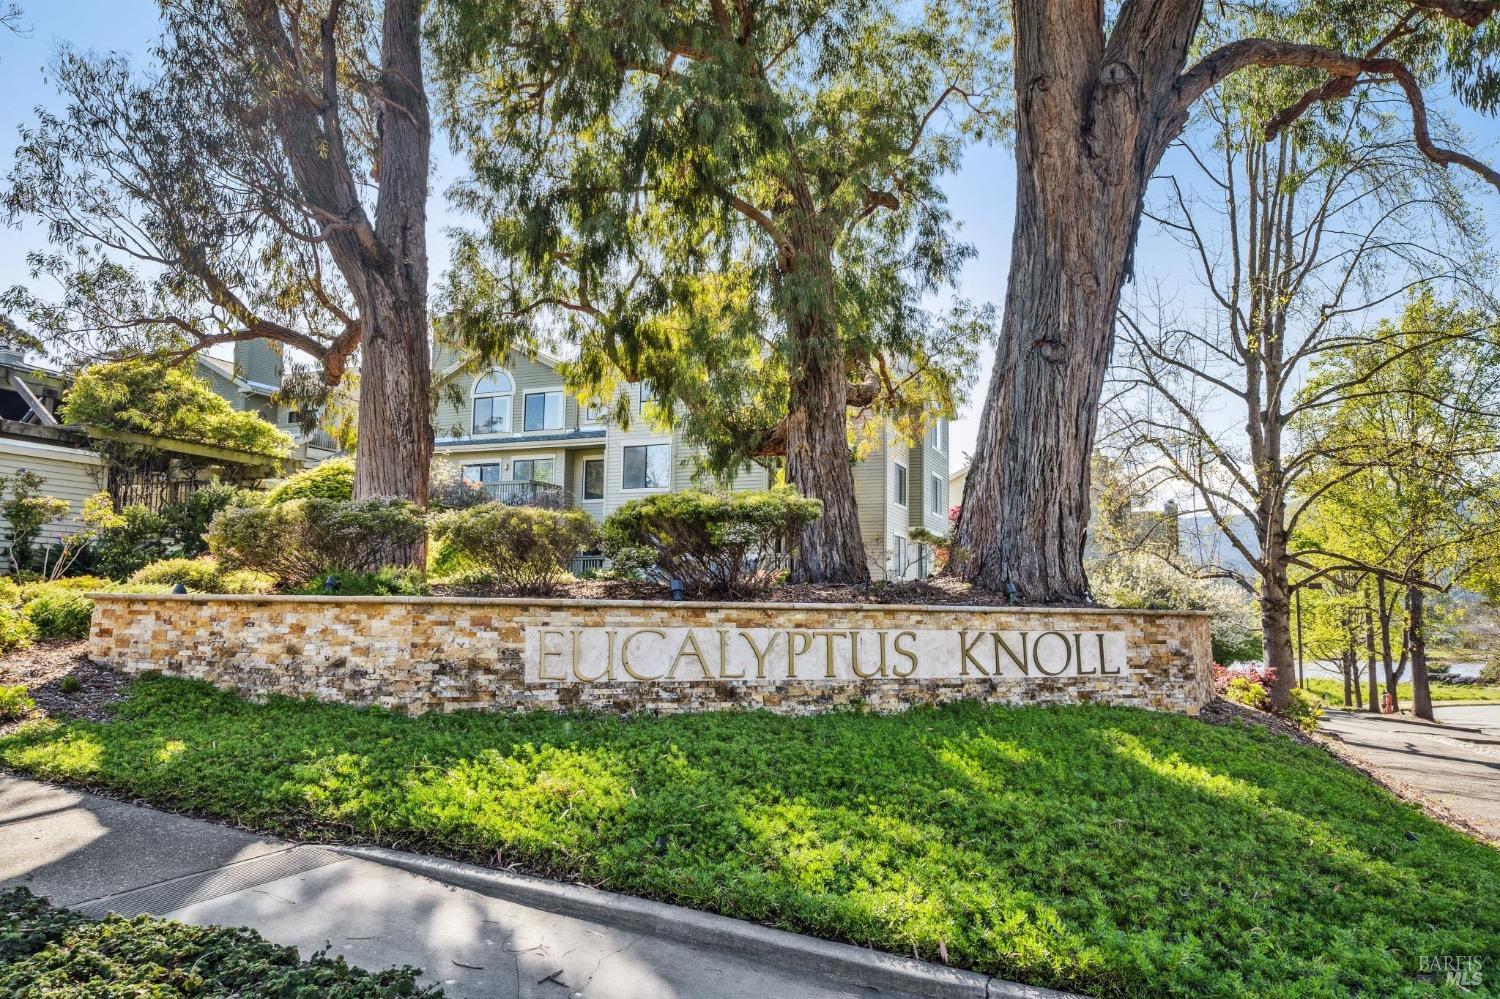 Photo of 118 Eucalyptus Knoll St in Mill Valley, CA